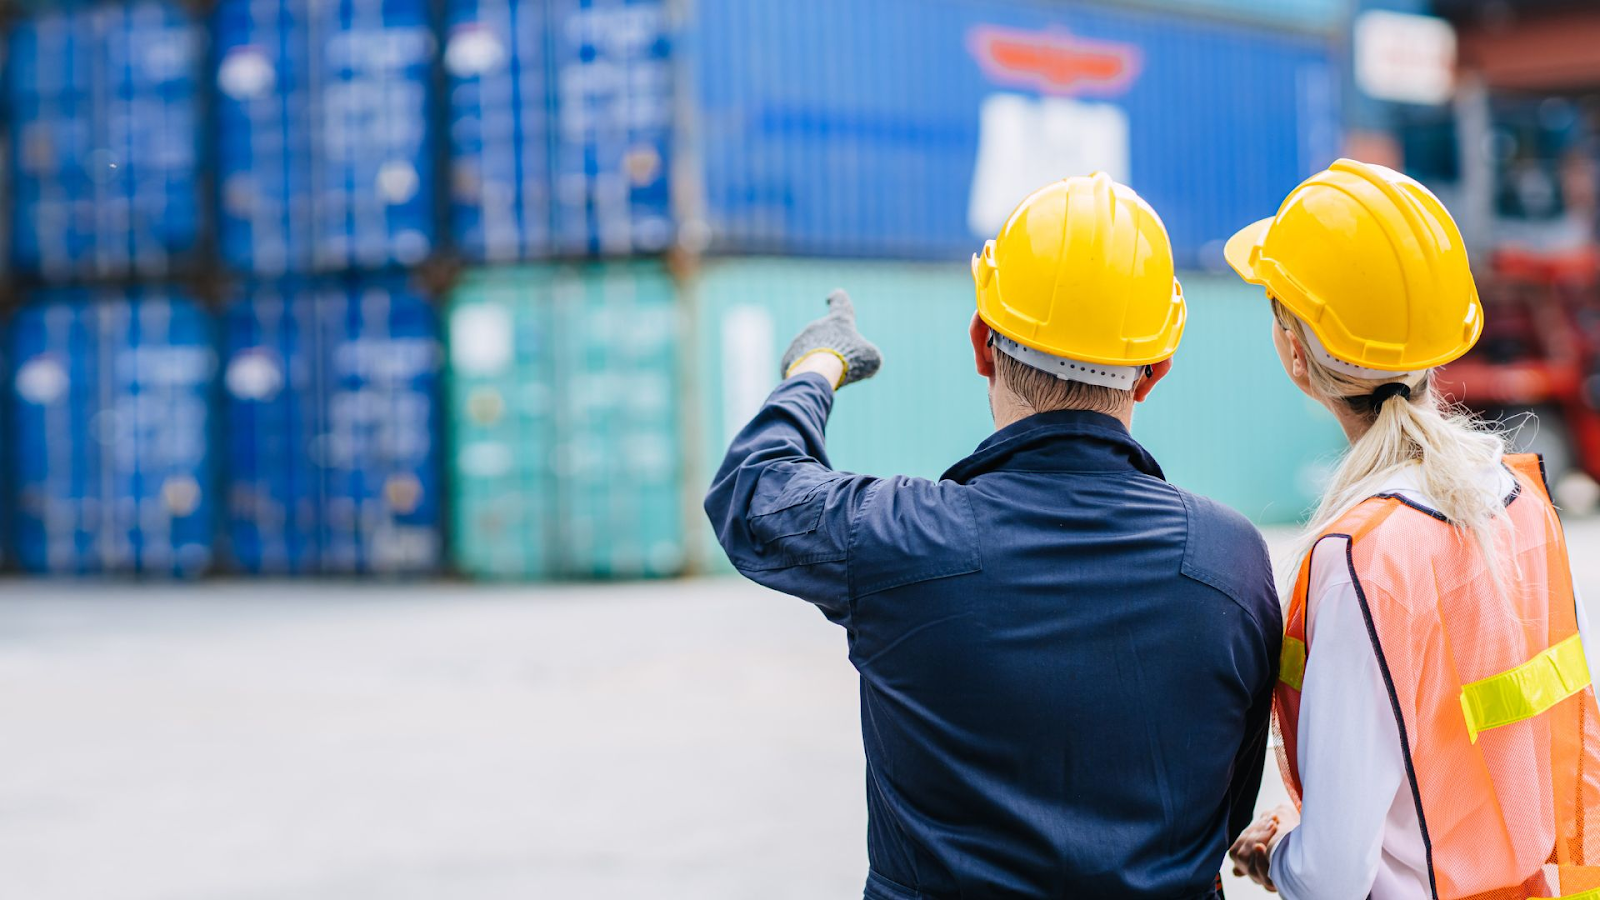 Rear view of two professionals at a shipping container yard. The person on the left, wearing a dark blue work uniform and a yellow safety helmet, is pointing towards something in the distance. The person on the right, wearing a reflective orange vest and a yellow safety helmet, is looking in the same direction. They are both standing in front of a backdrop of stacked blue shipping containers, indicative of an industrial port or logistics hub.